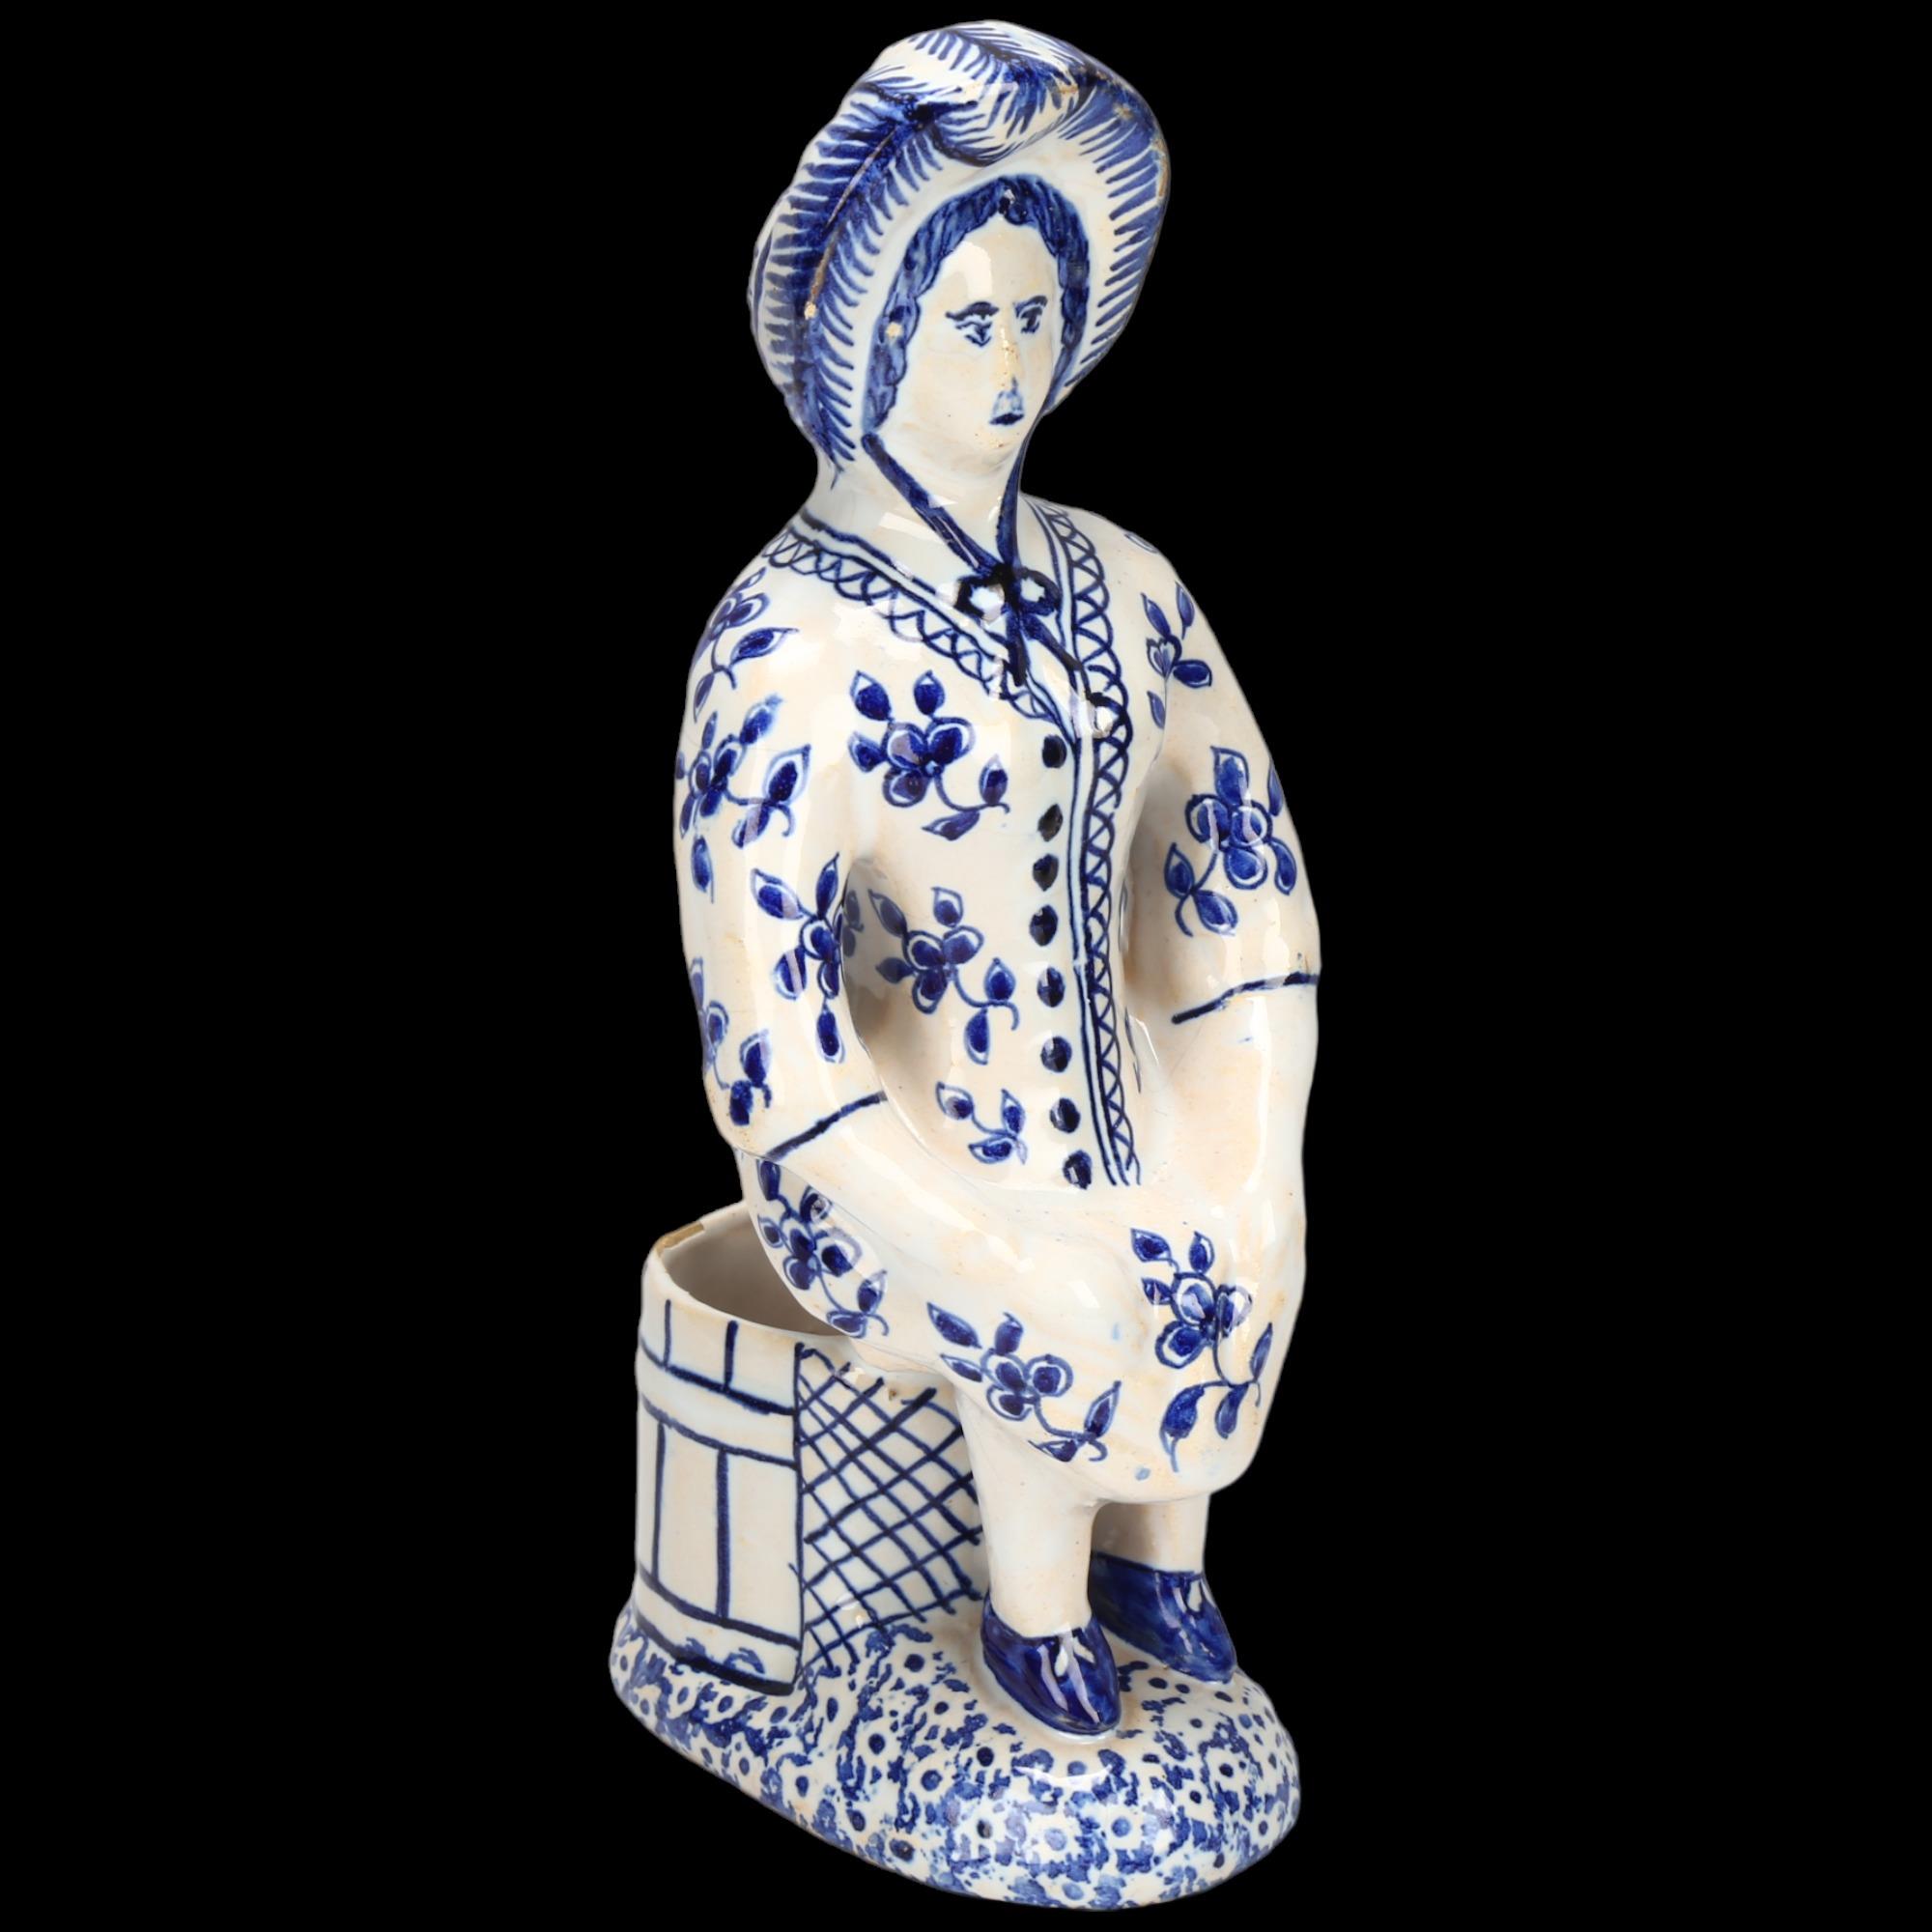 Delft blue and white pottery table salt figure, height 18cm Minor glaze rubbing around the edge of